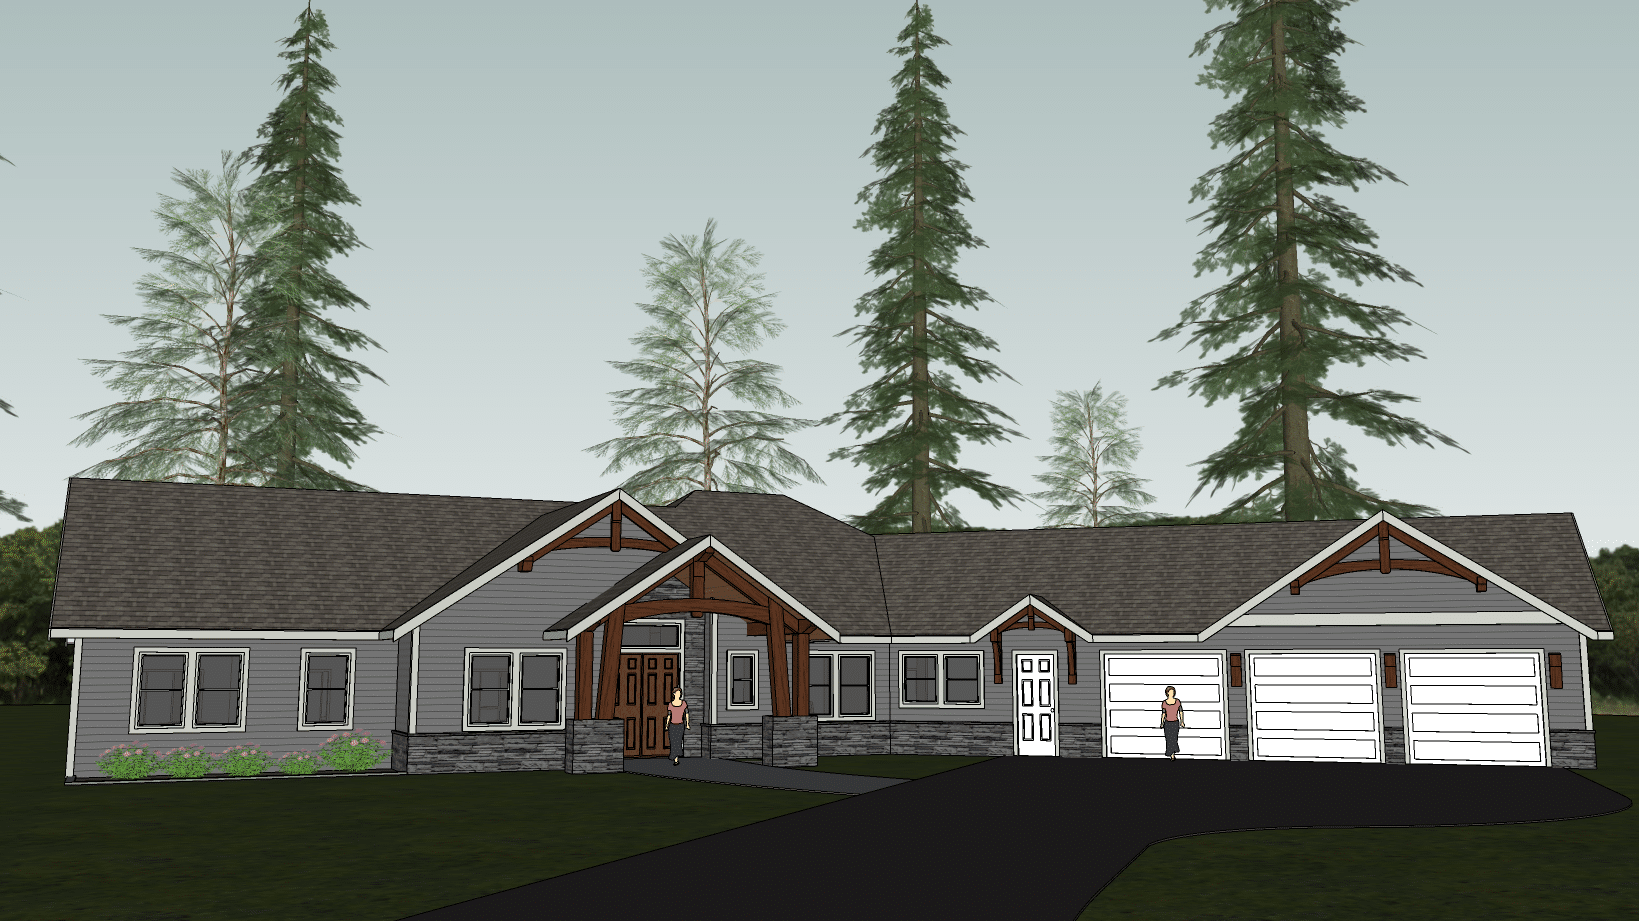 One-Story Ranch House Floor Plan with Timber Framing